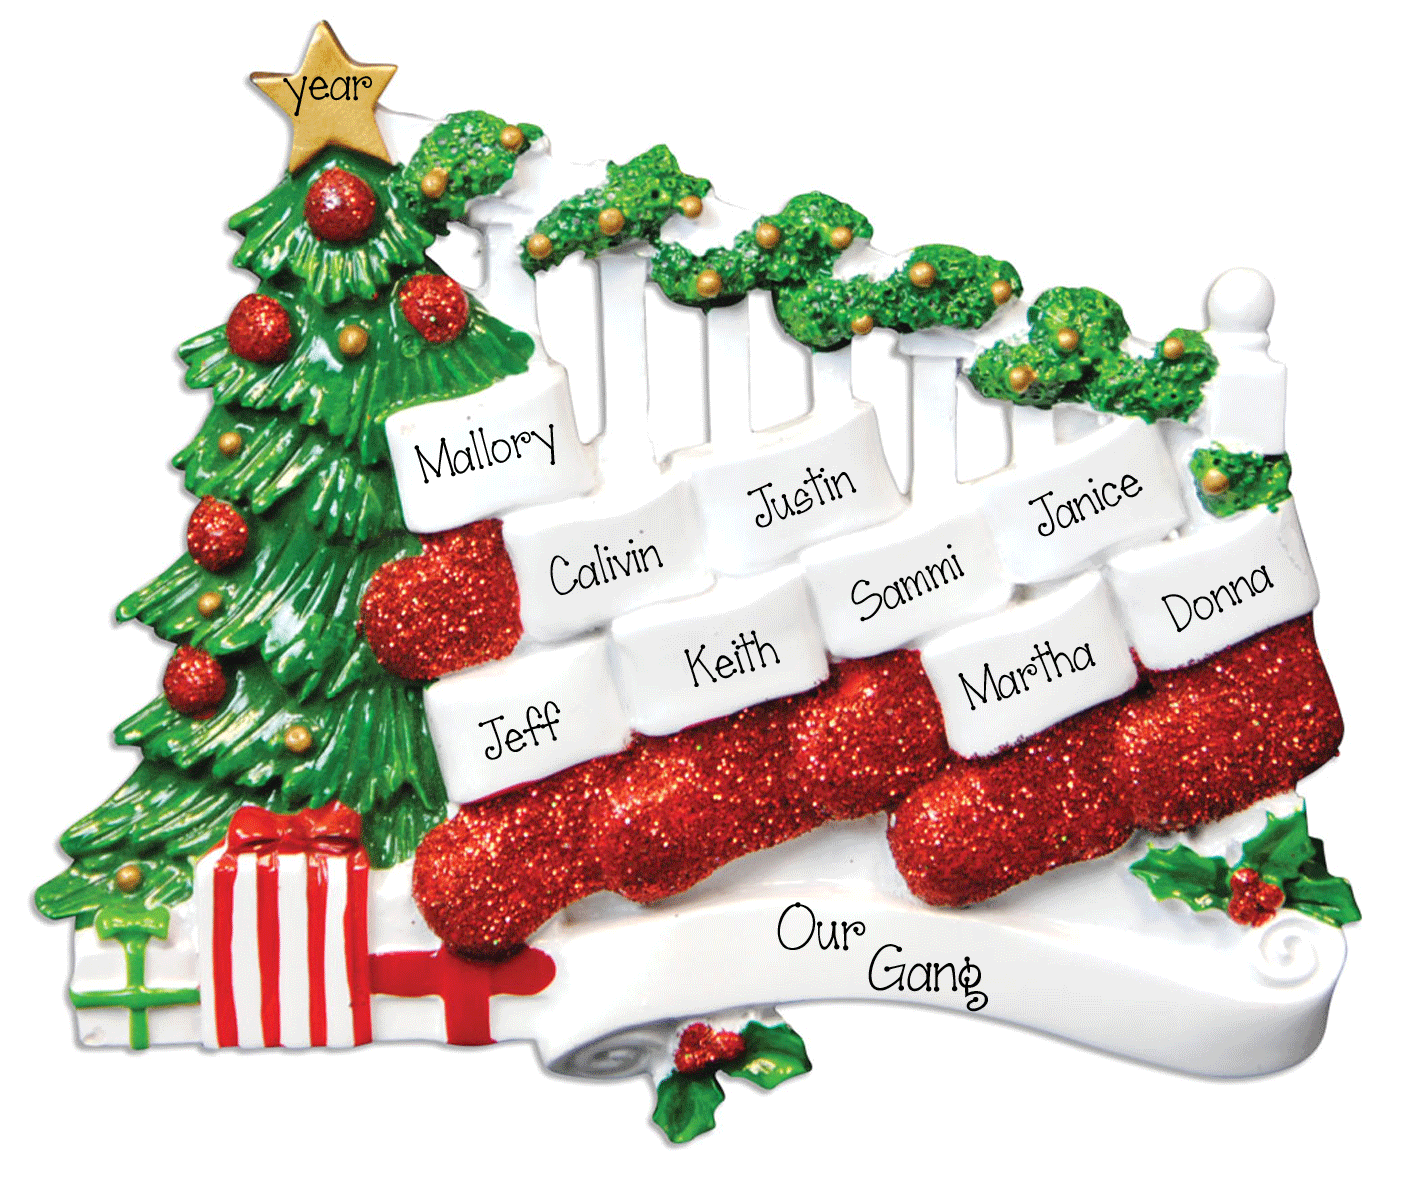 Personalized Ornaments family of 10 Stockings